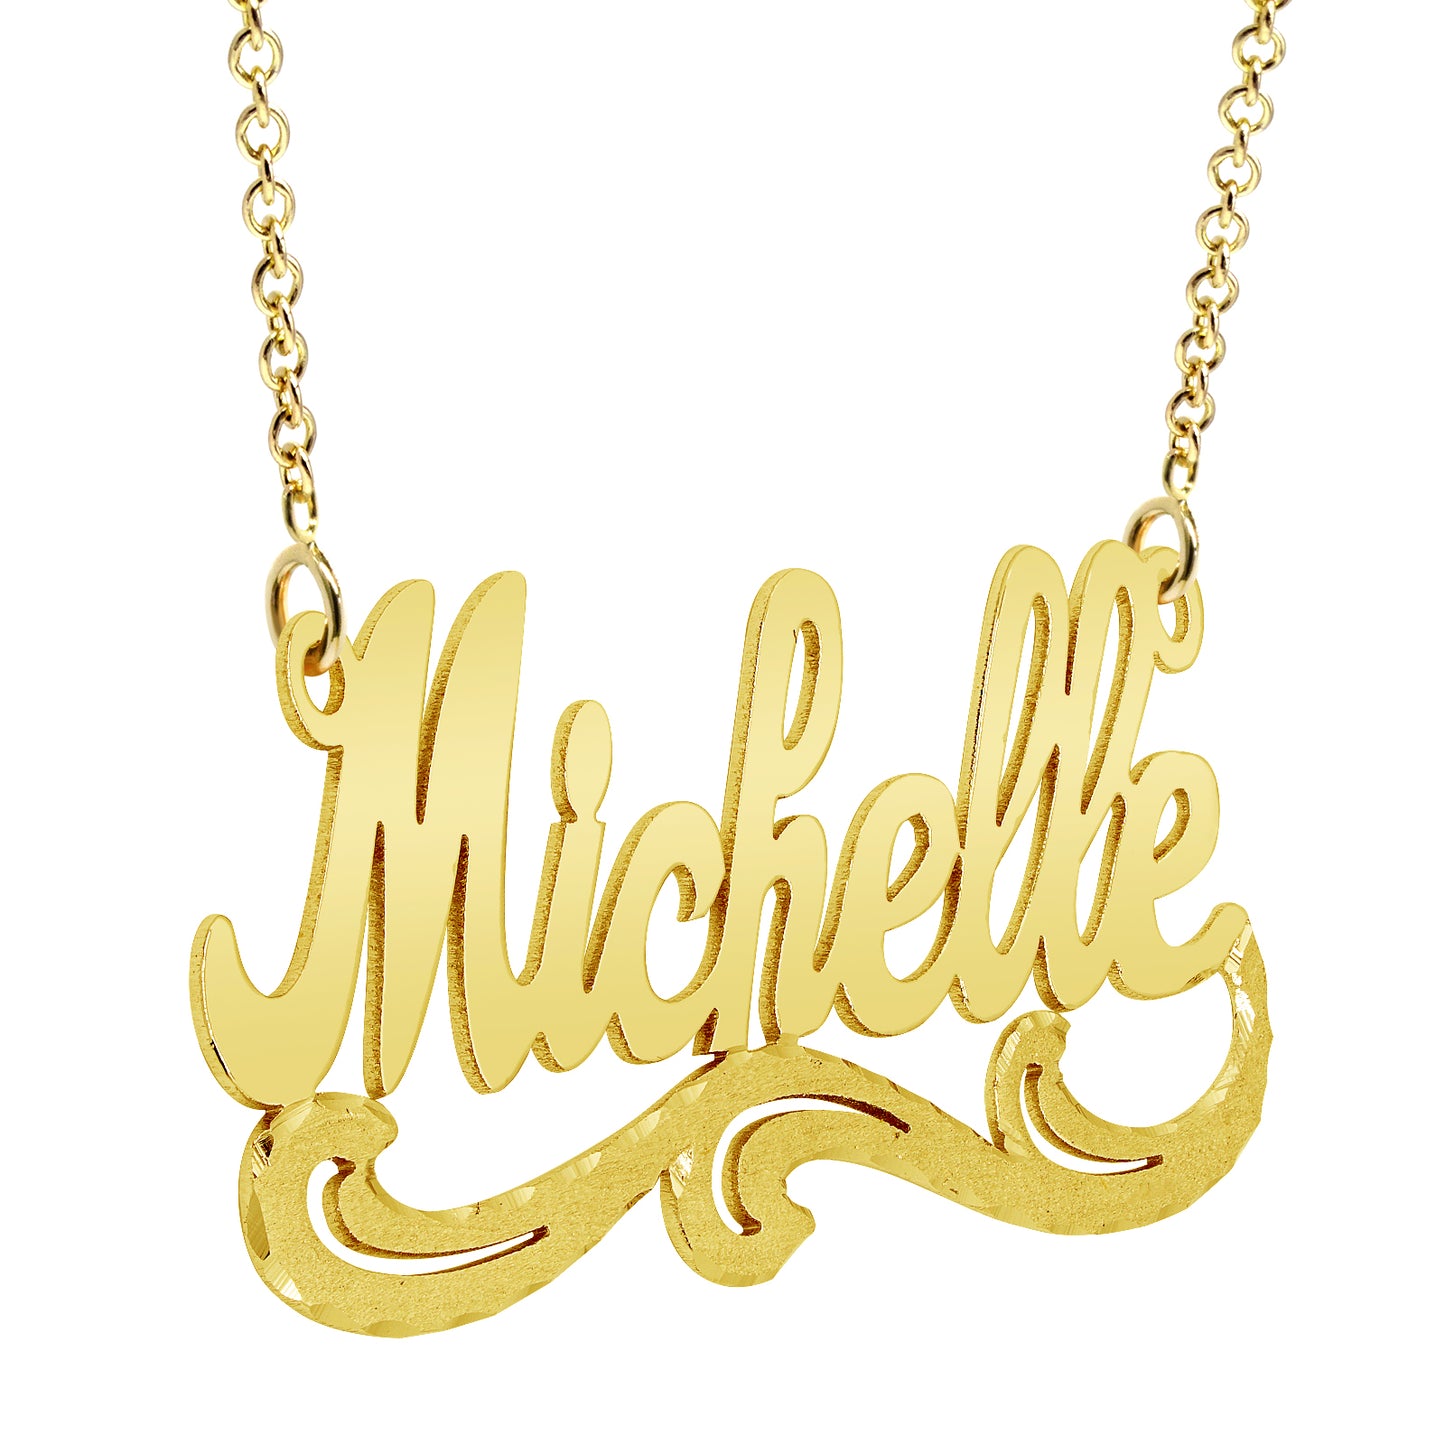 High Polished Name Plate with Florentine Finish Tails set in 14K Gold